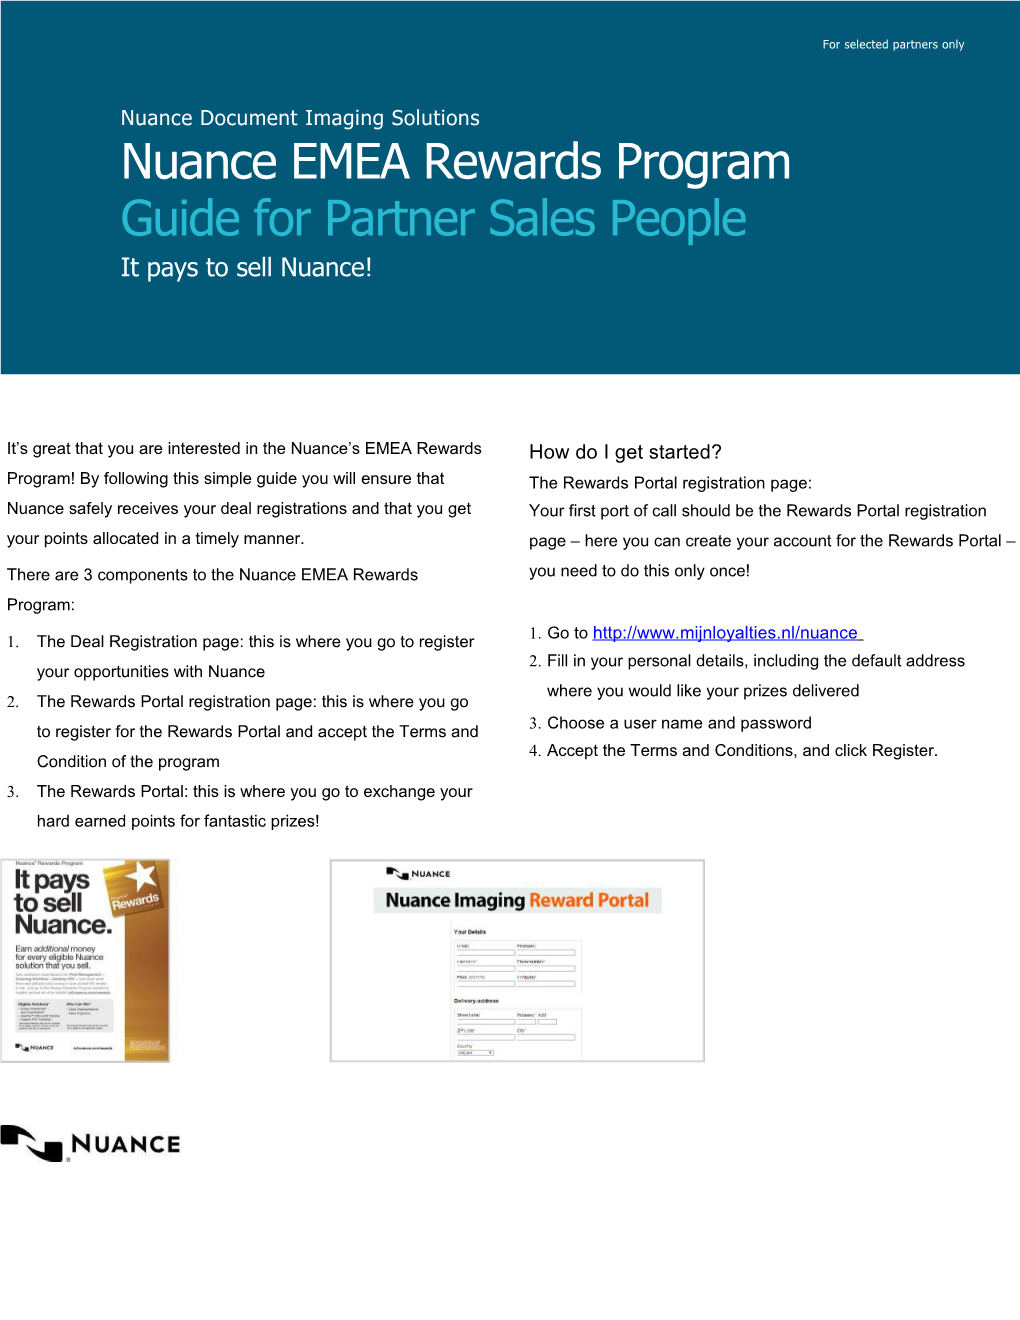 There Are 3 Components to the Nuance EMEA Rewards Program